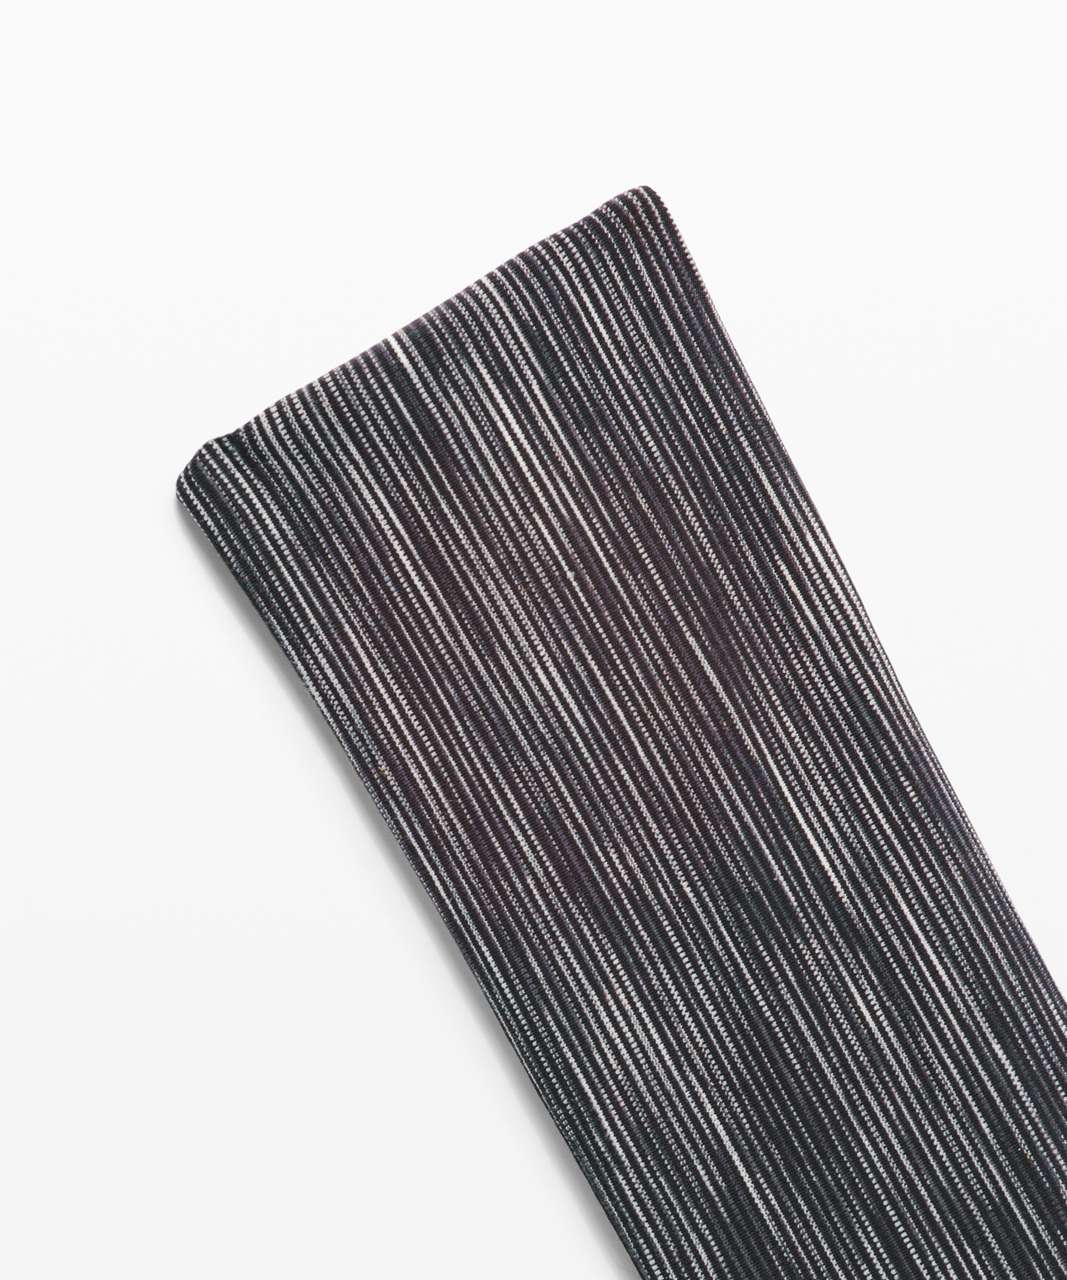 Lululemon Fringe Fighter Headband - Wee Are From Space Dark Carbon Ice Grey / Black